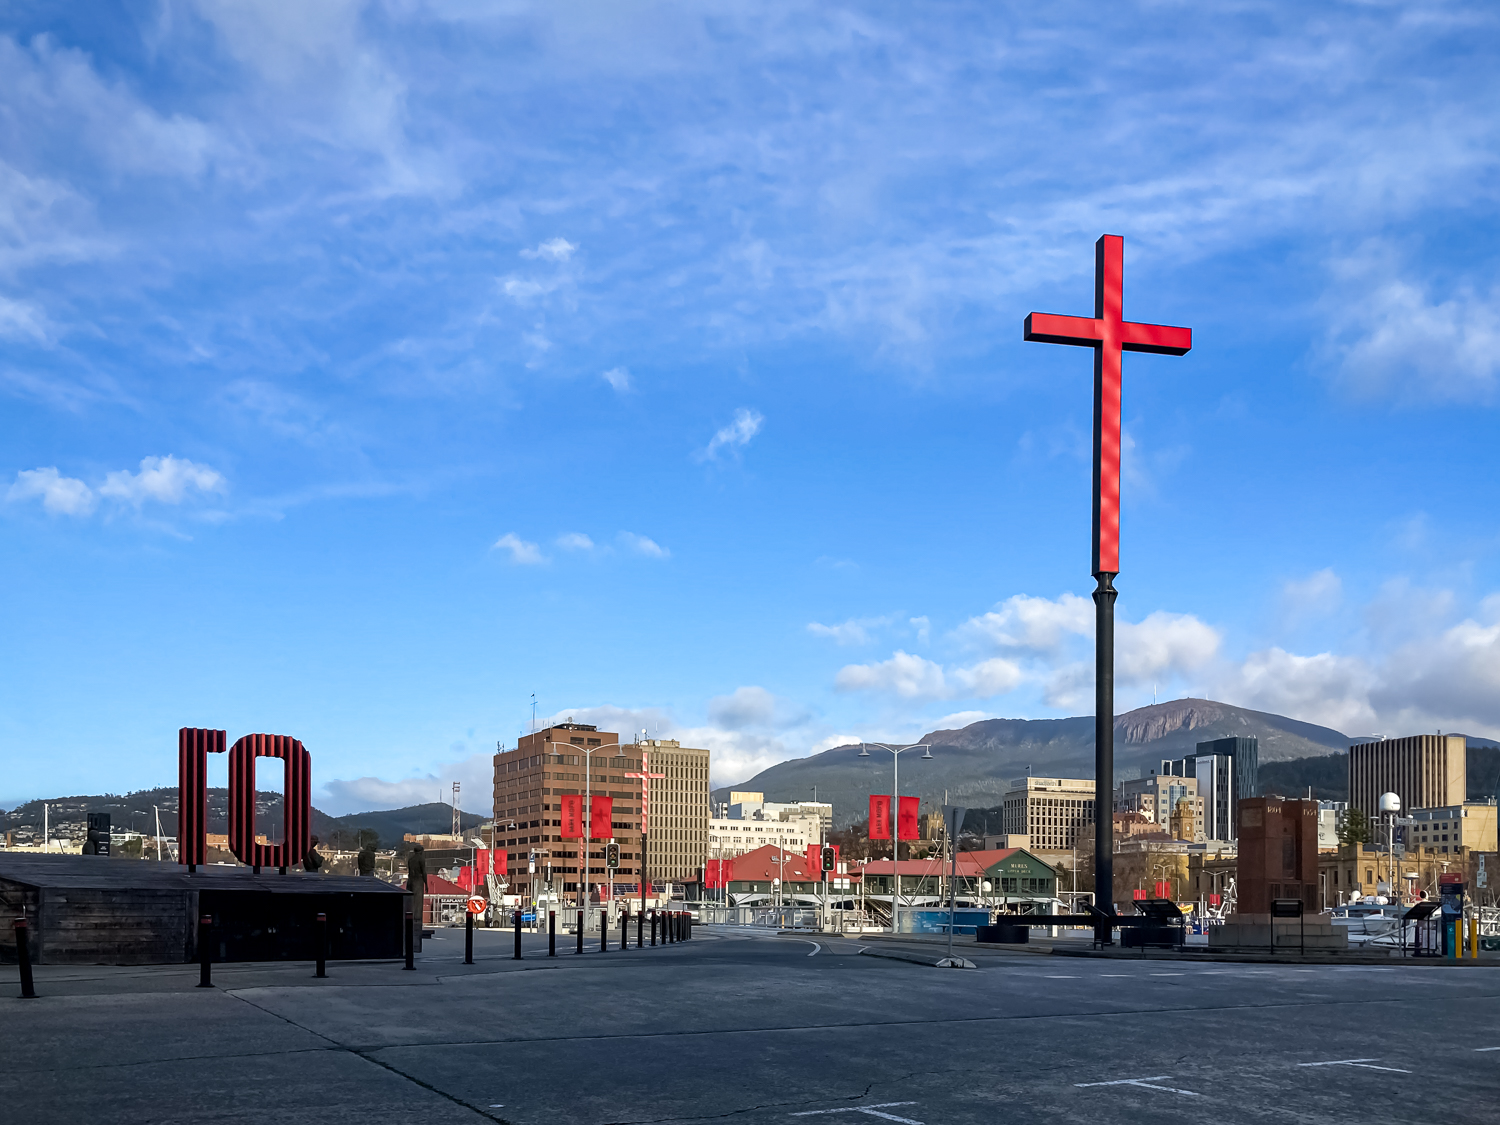 A large red cross on a black pole stand out in front of waterfront buildings